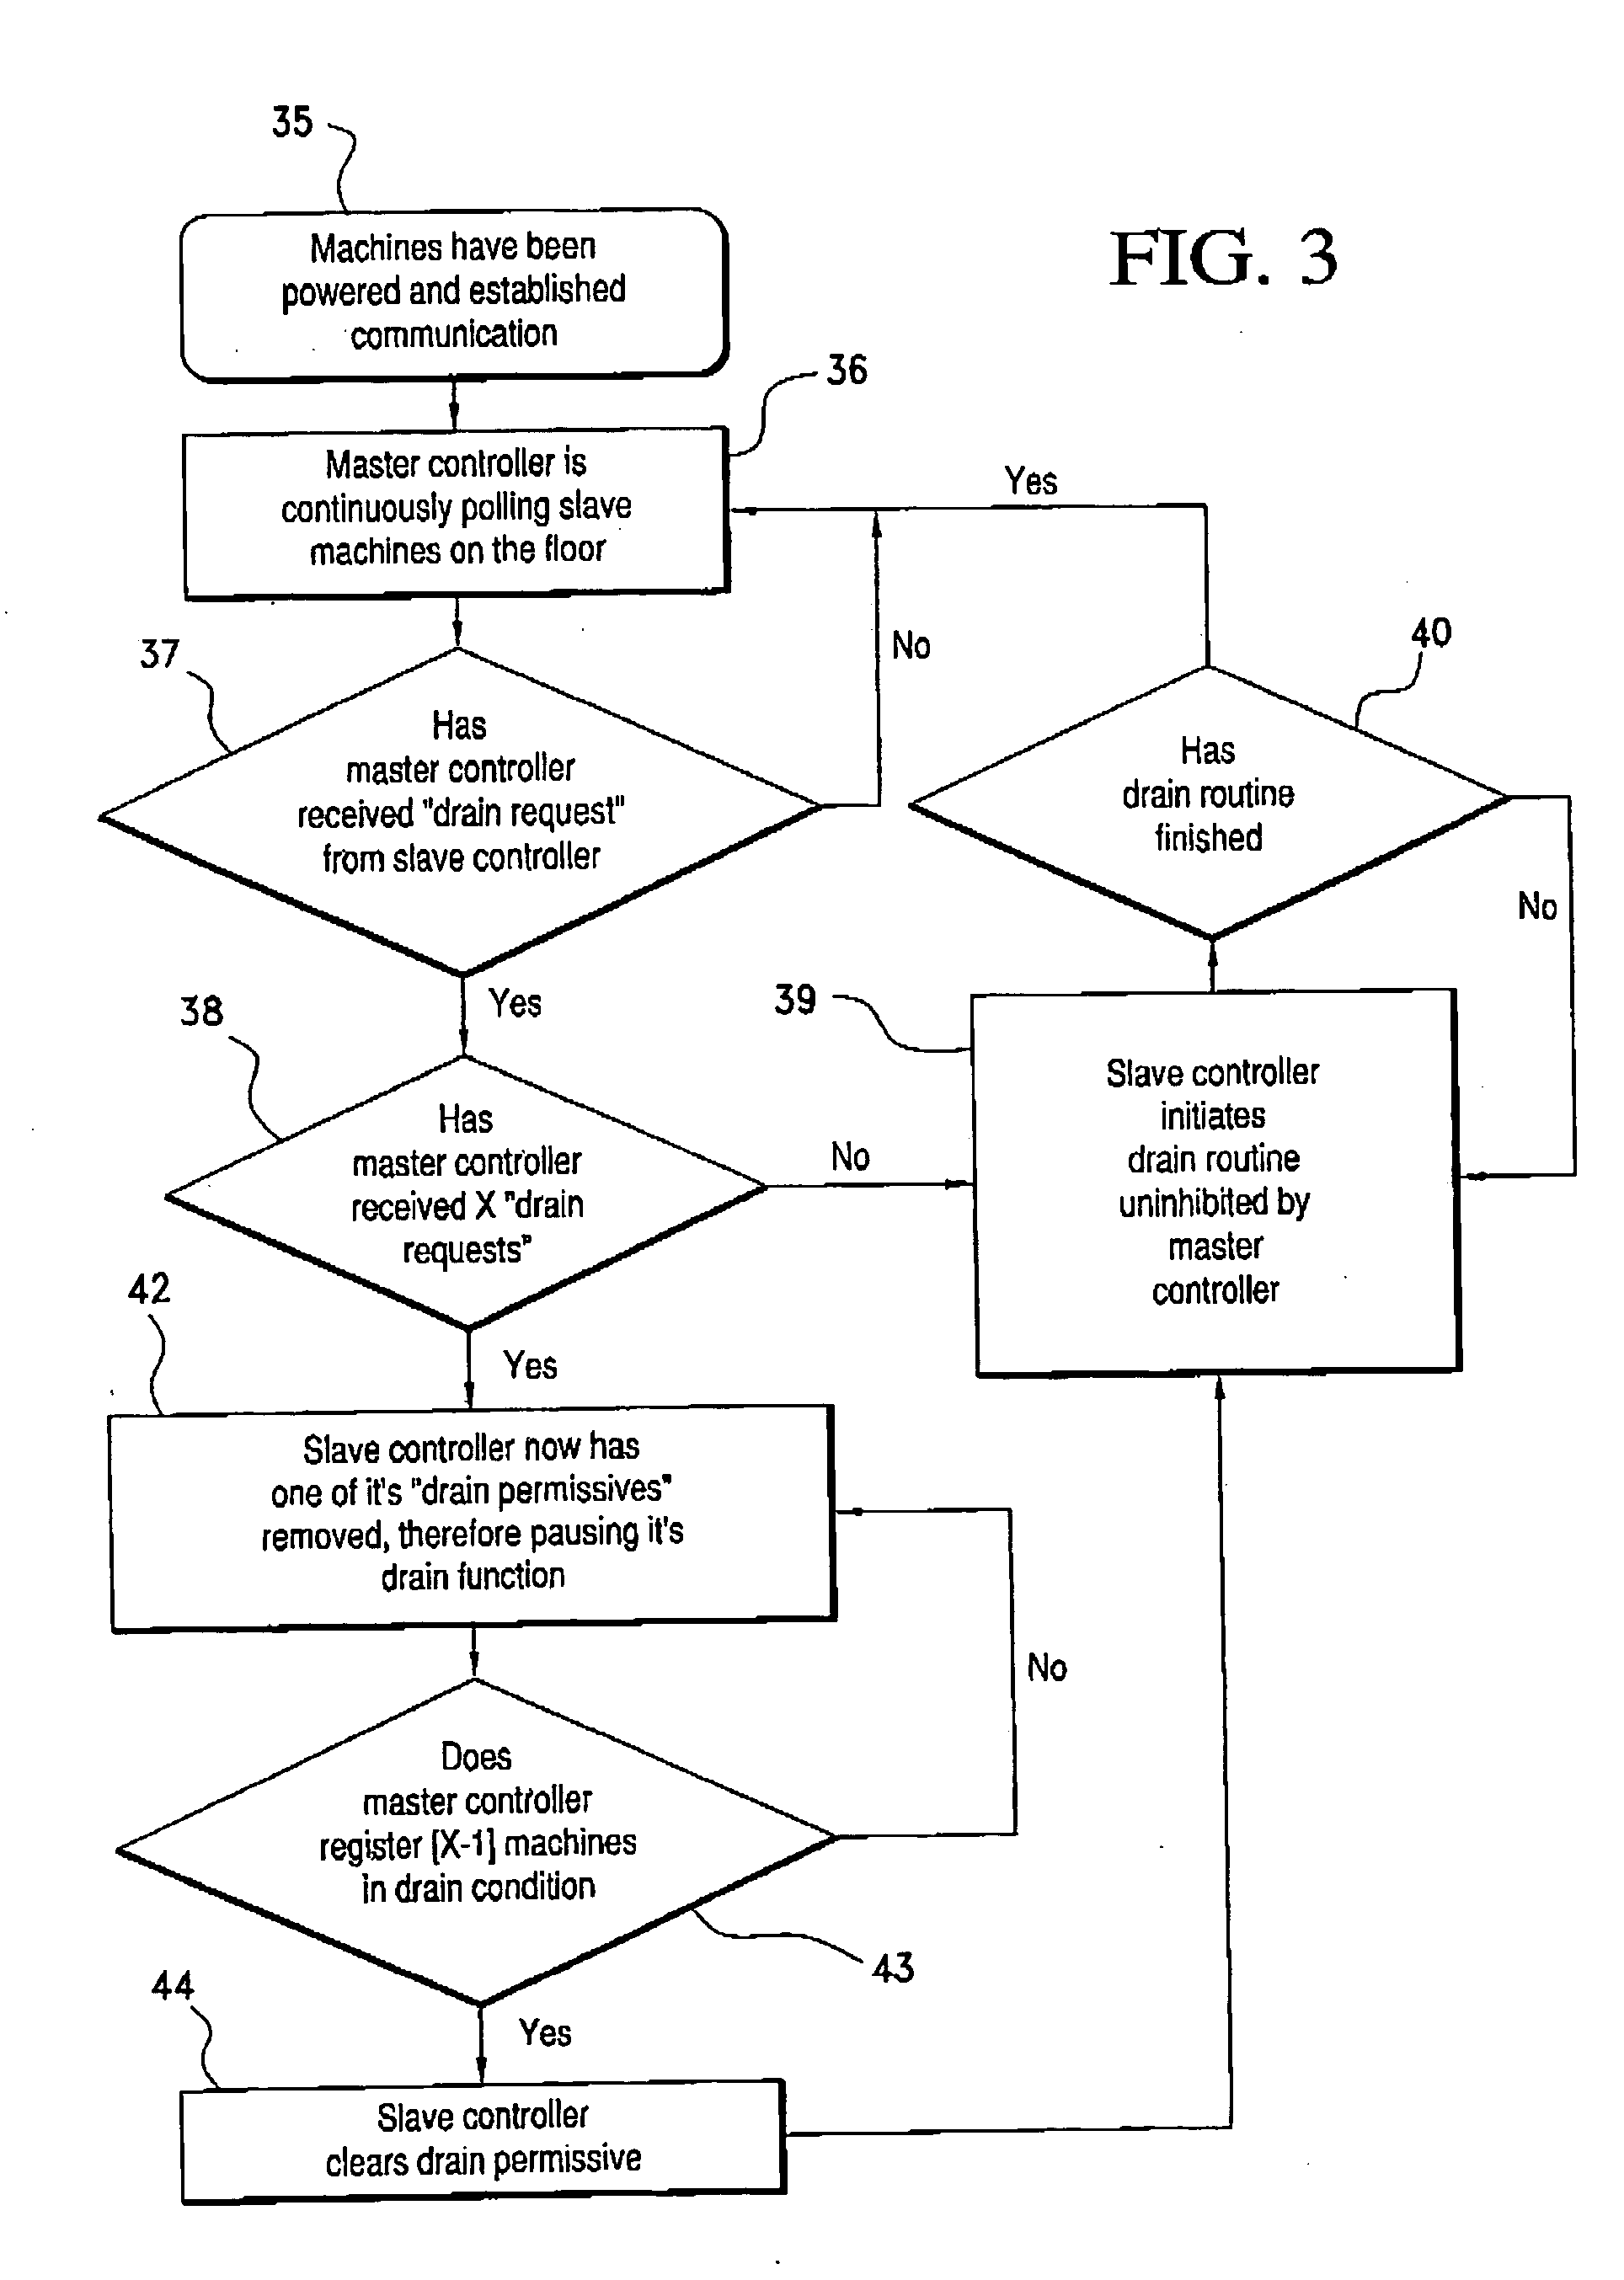 Network and protocol for controlling washing and drying machines which share common utilities